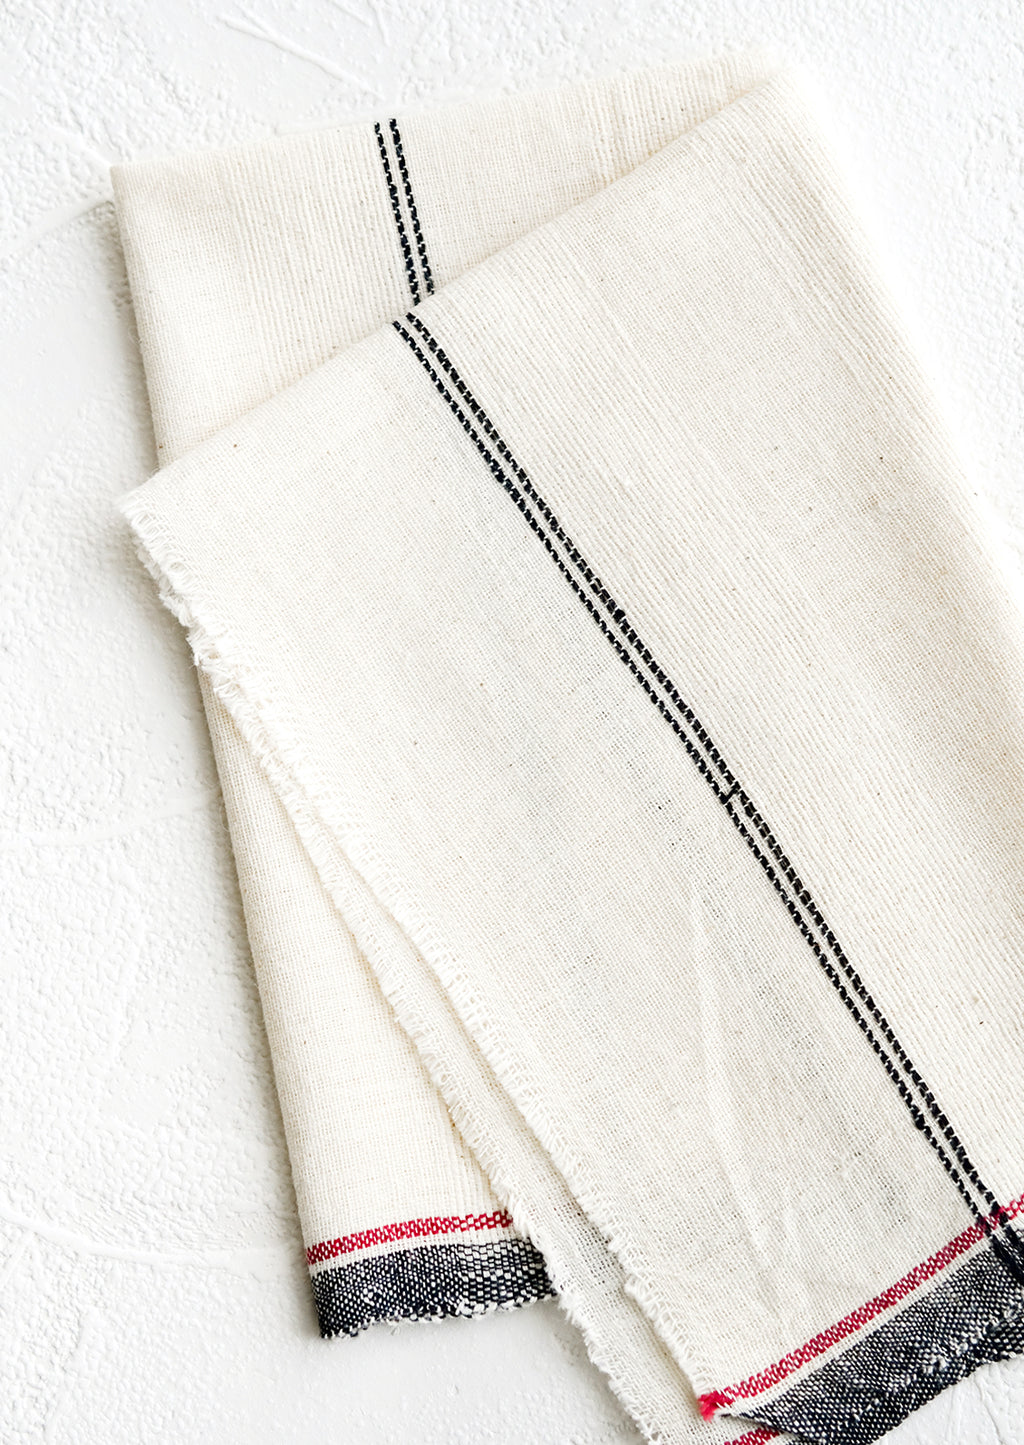 2: A natural cotton napkin with black and red stripe detailing and raw edges.